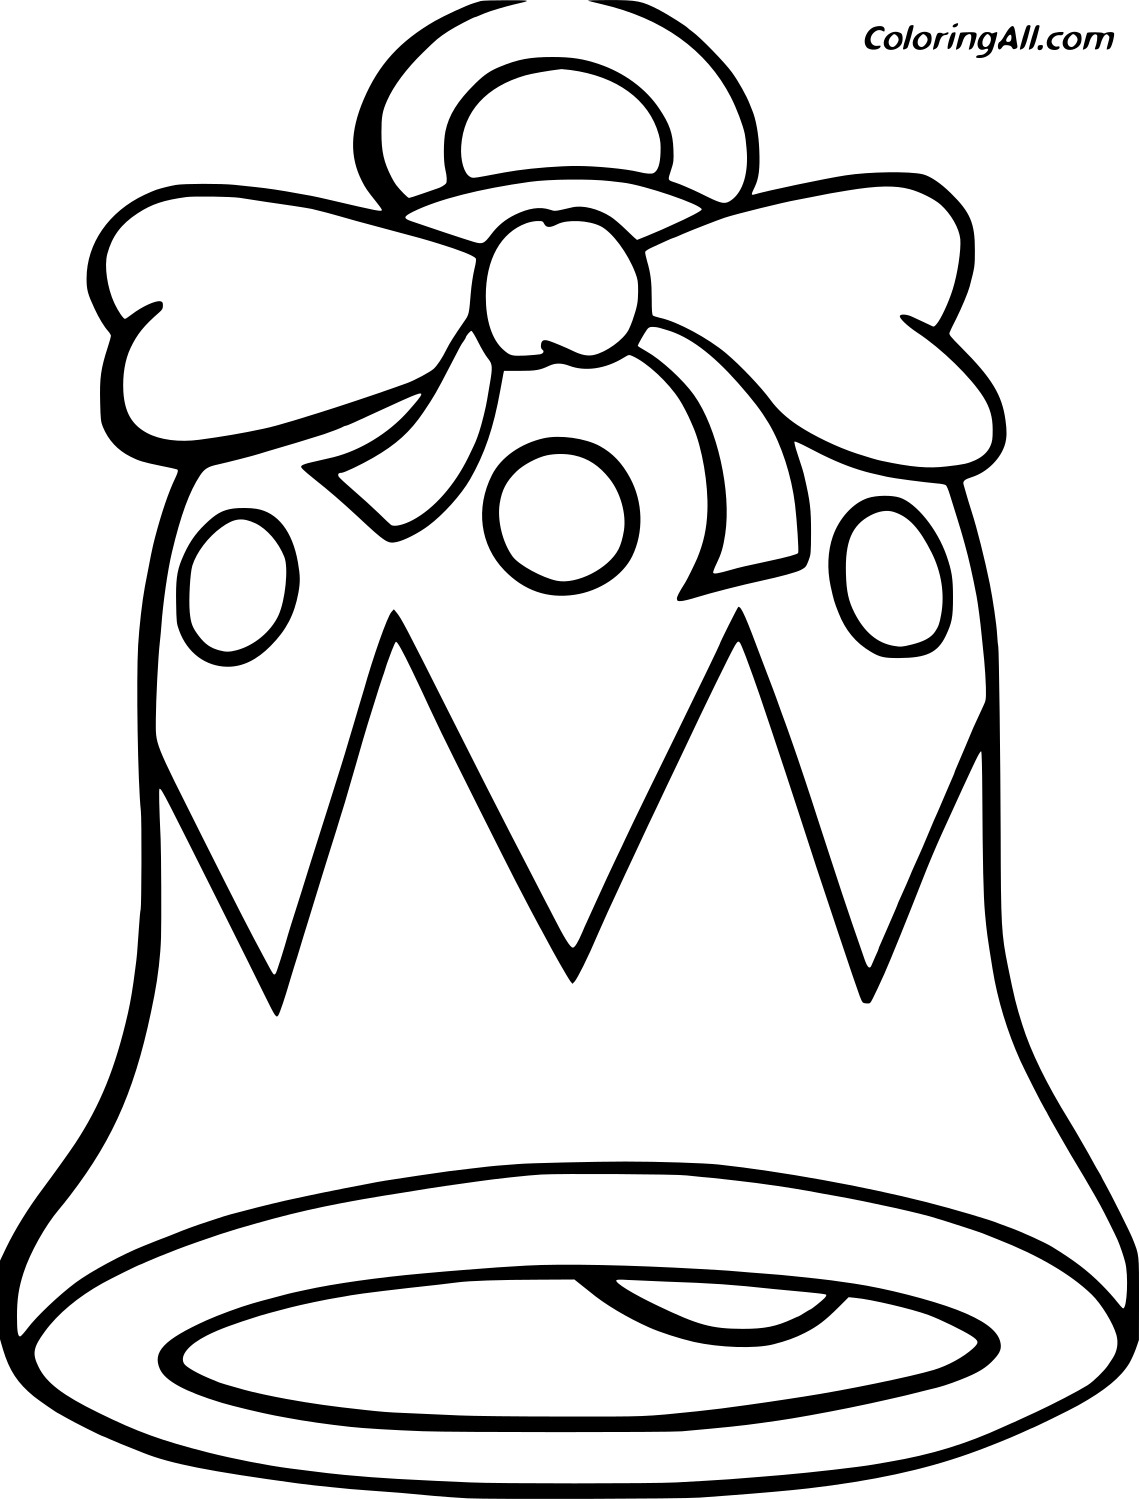 Big Christmas Bell Image For Kids Coloring Page